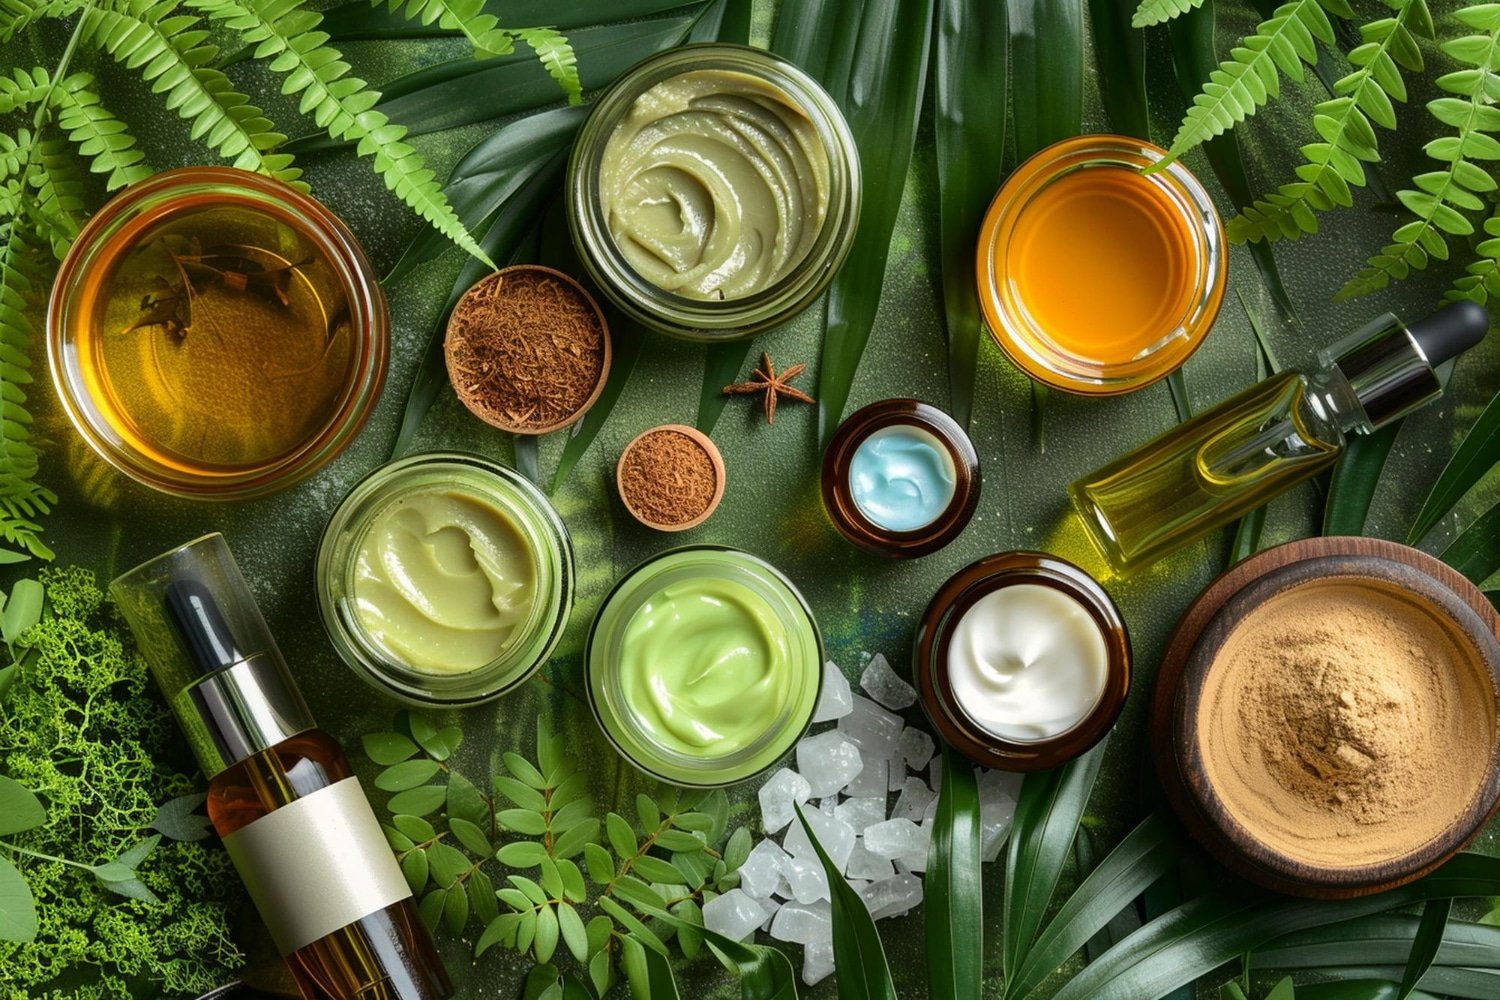 Experience Natural Haircare With Ceremonia’s Plant-Based Hair Products